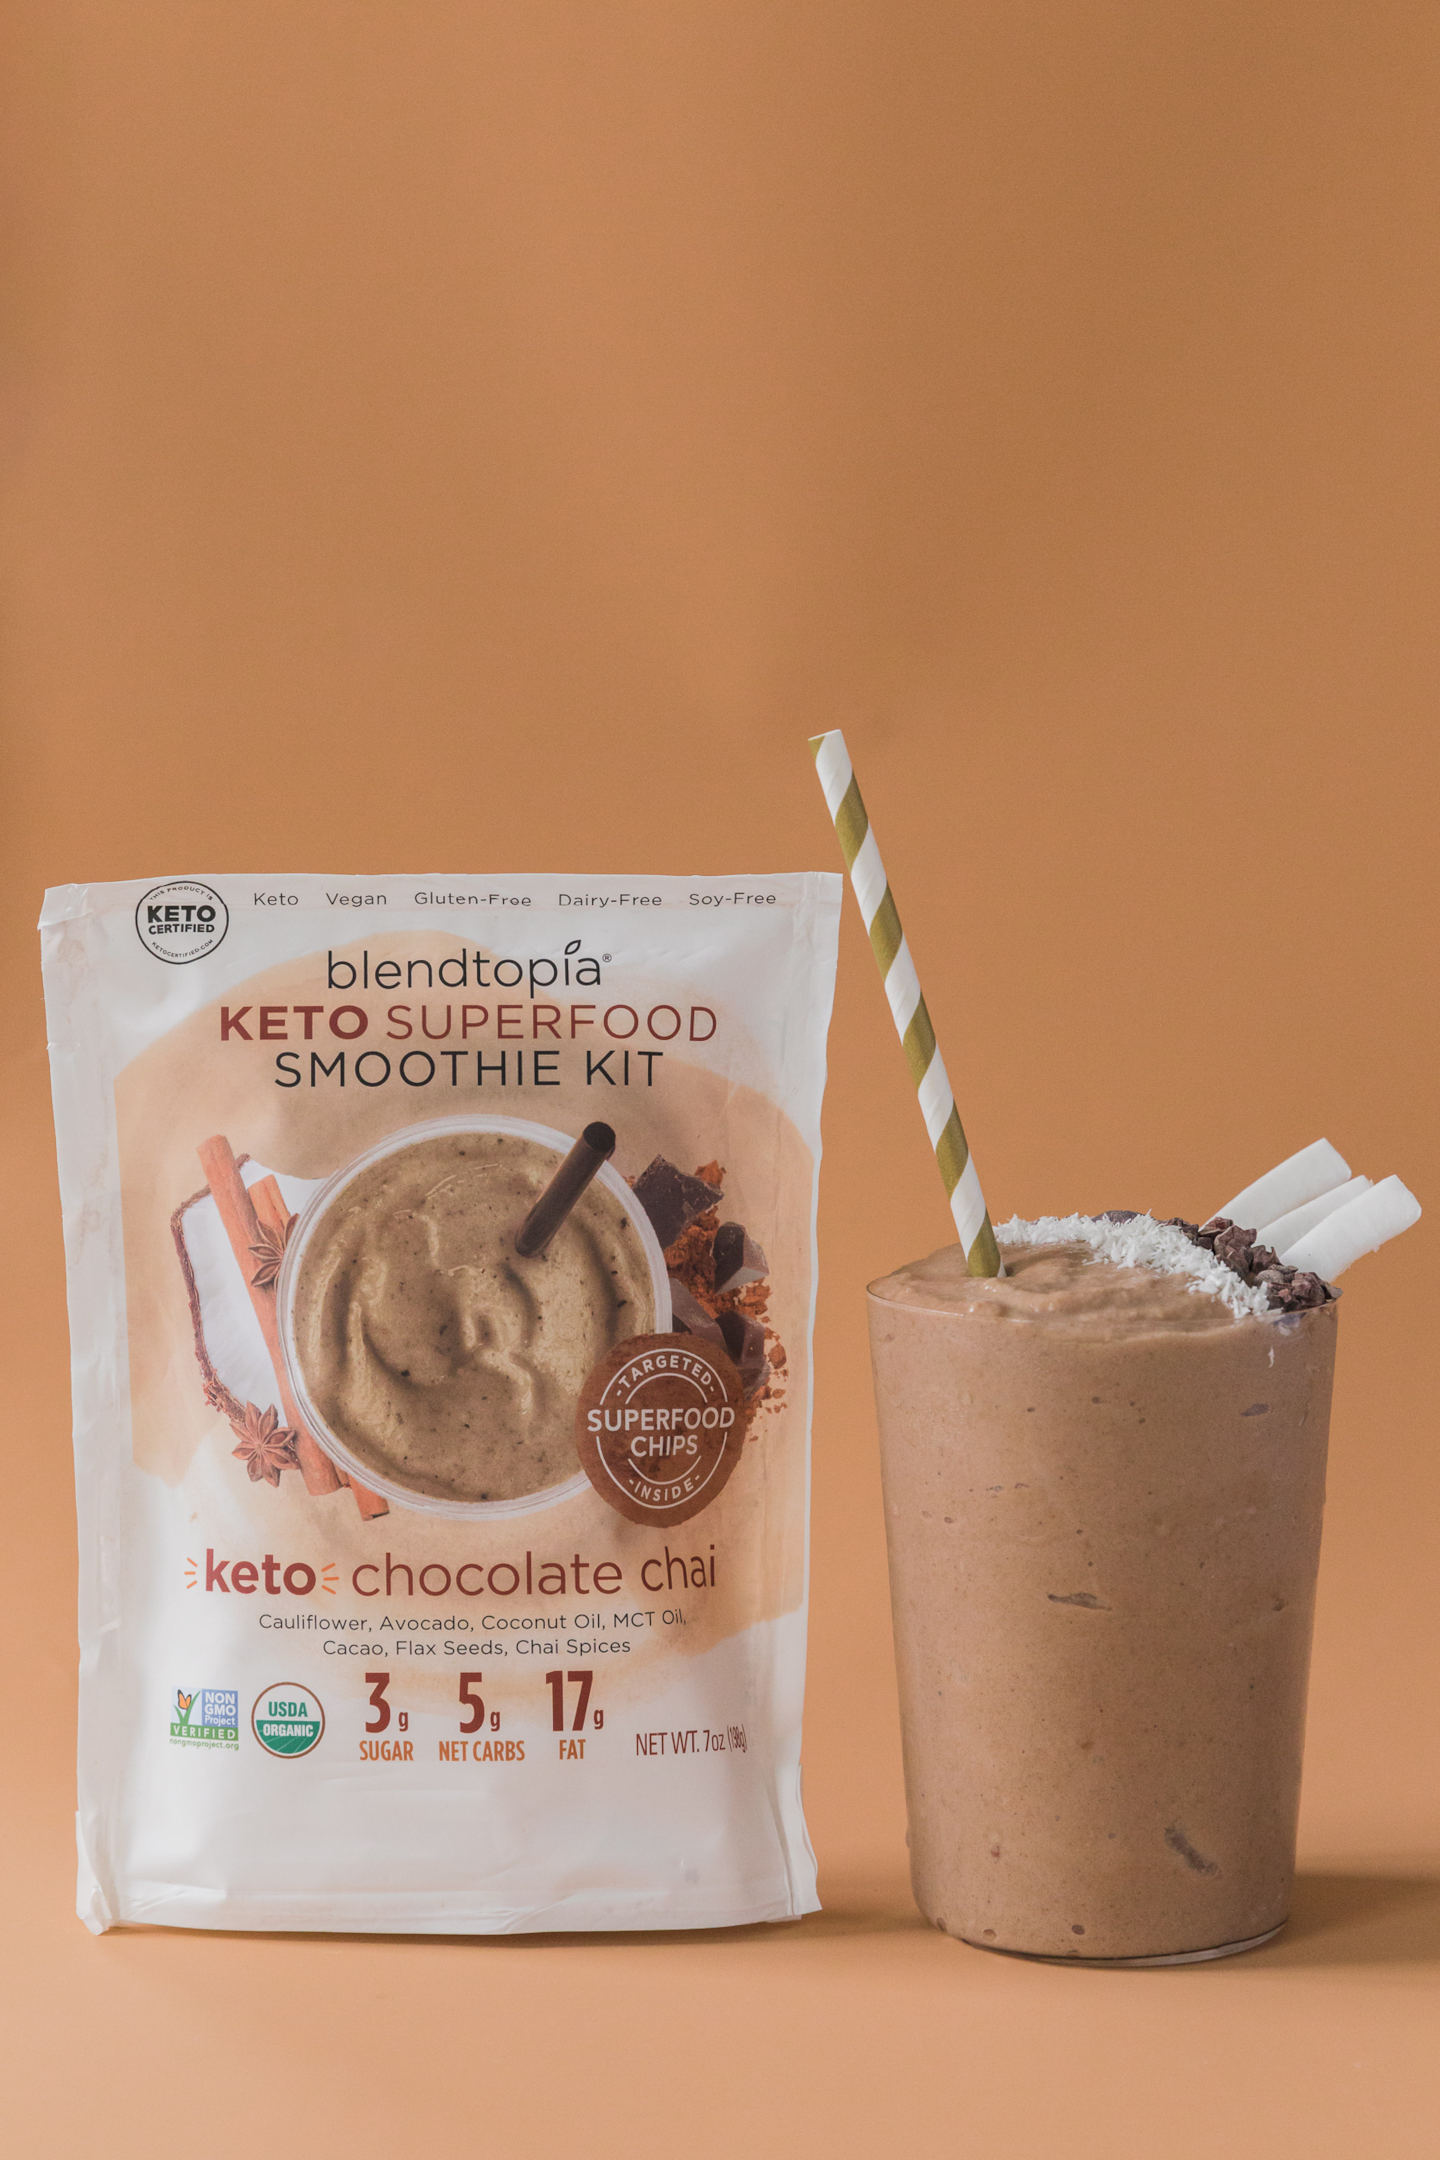 keto smoothie with unsweetened almond milk and coconut oil that adds sweetness and protects immune system